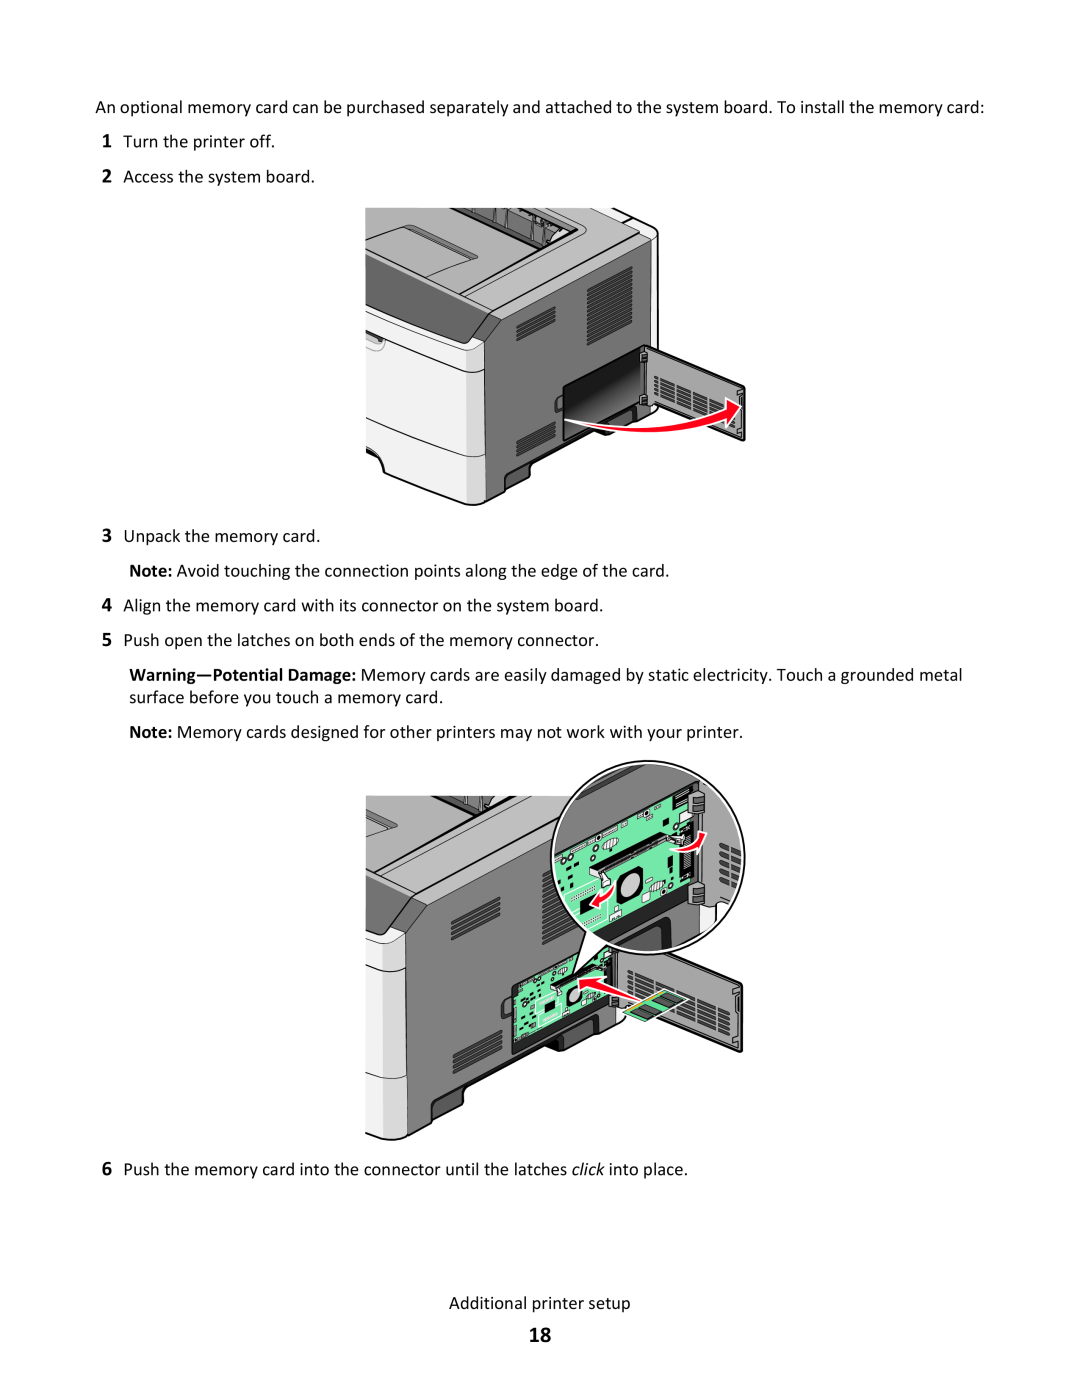 Lexmark 34S0300, 34S0100 Turn the printer off 2 Access the system board, Unpack the memory card, Additional printer setup 